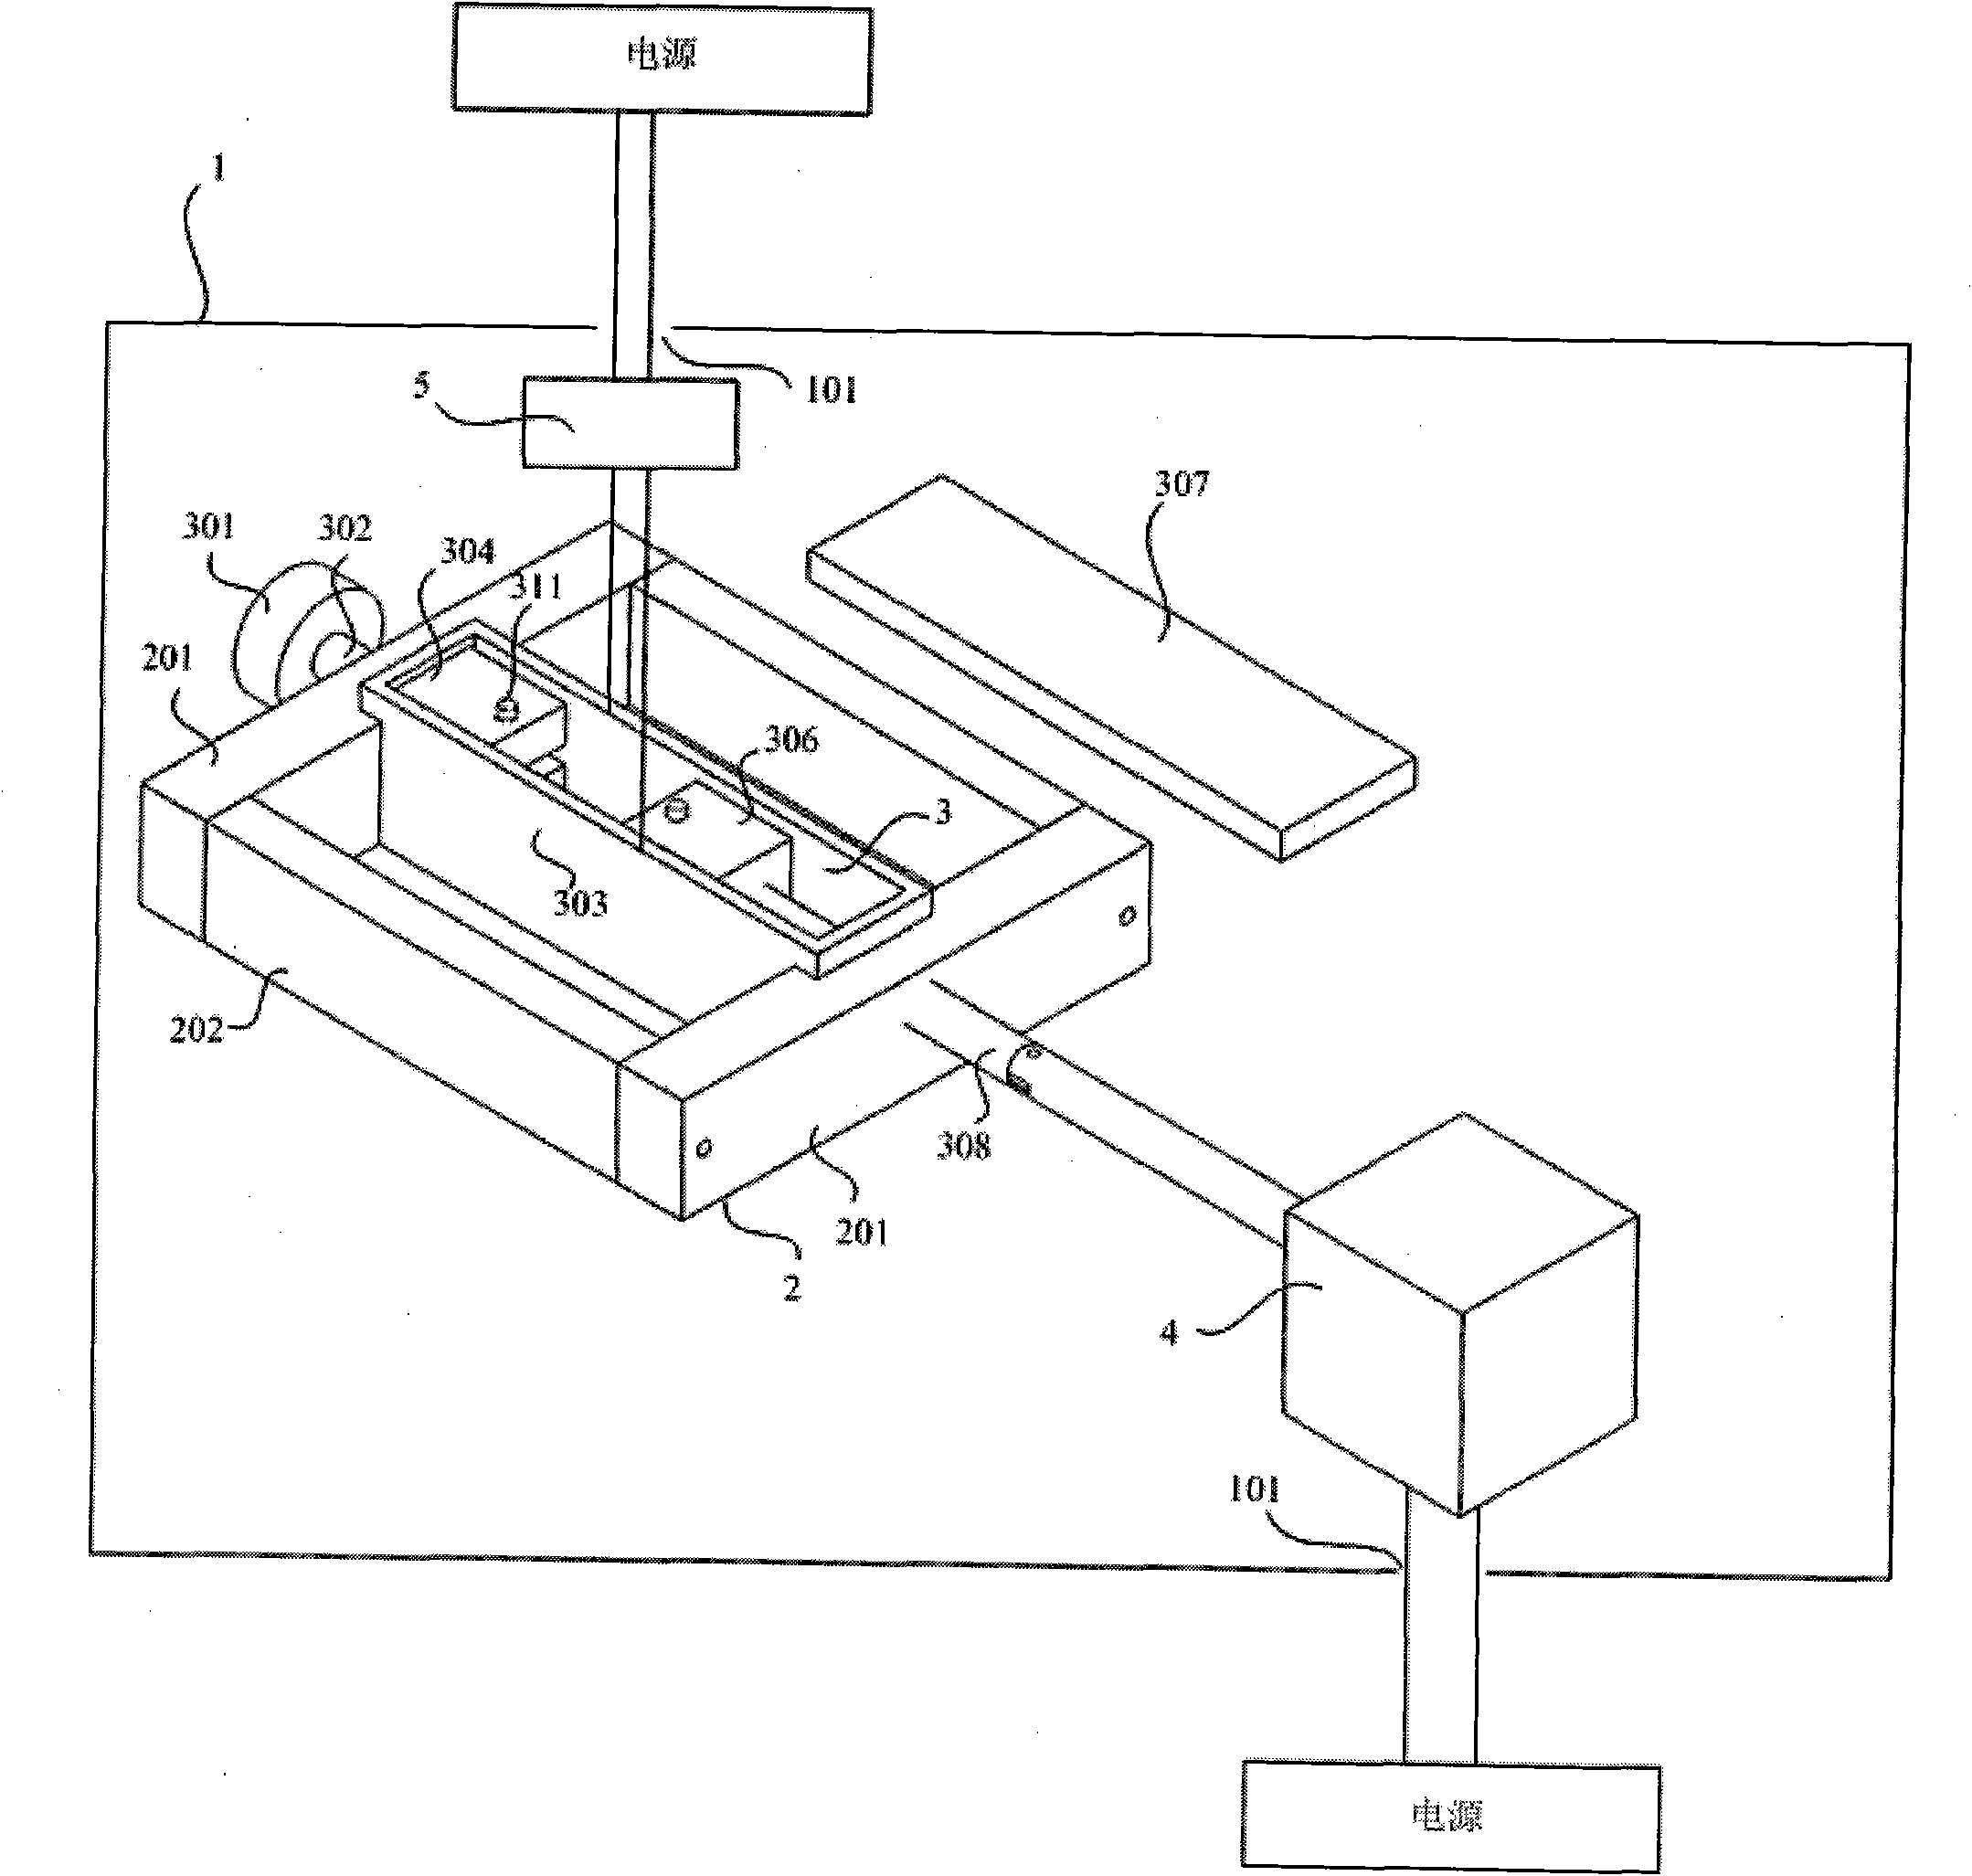 Stretch-electricity combinational stimulation cell culture device